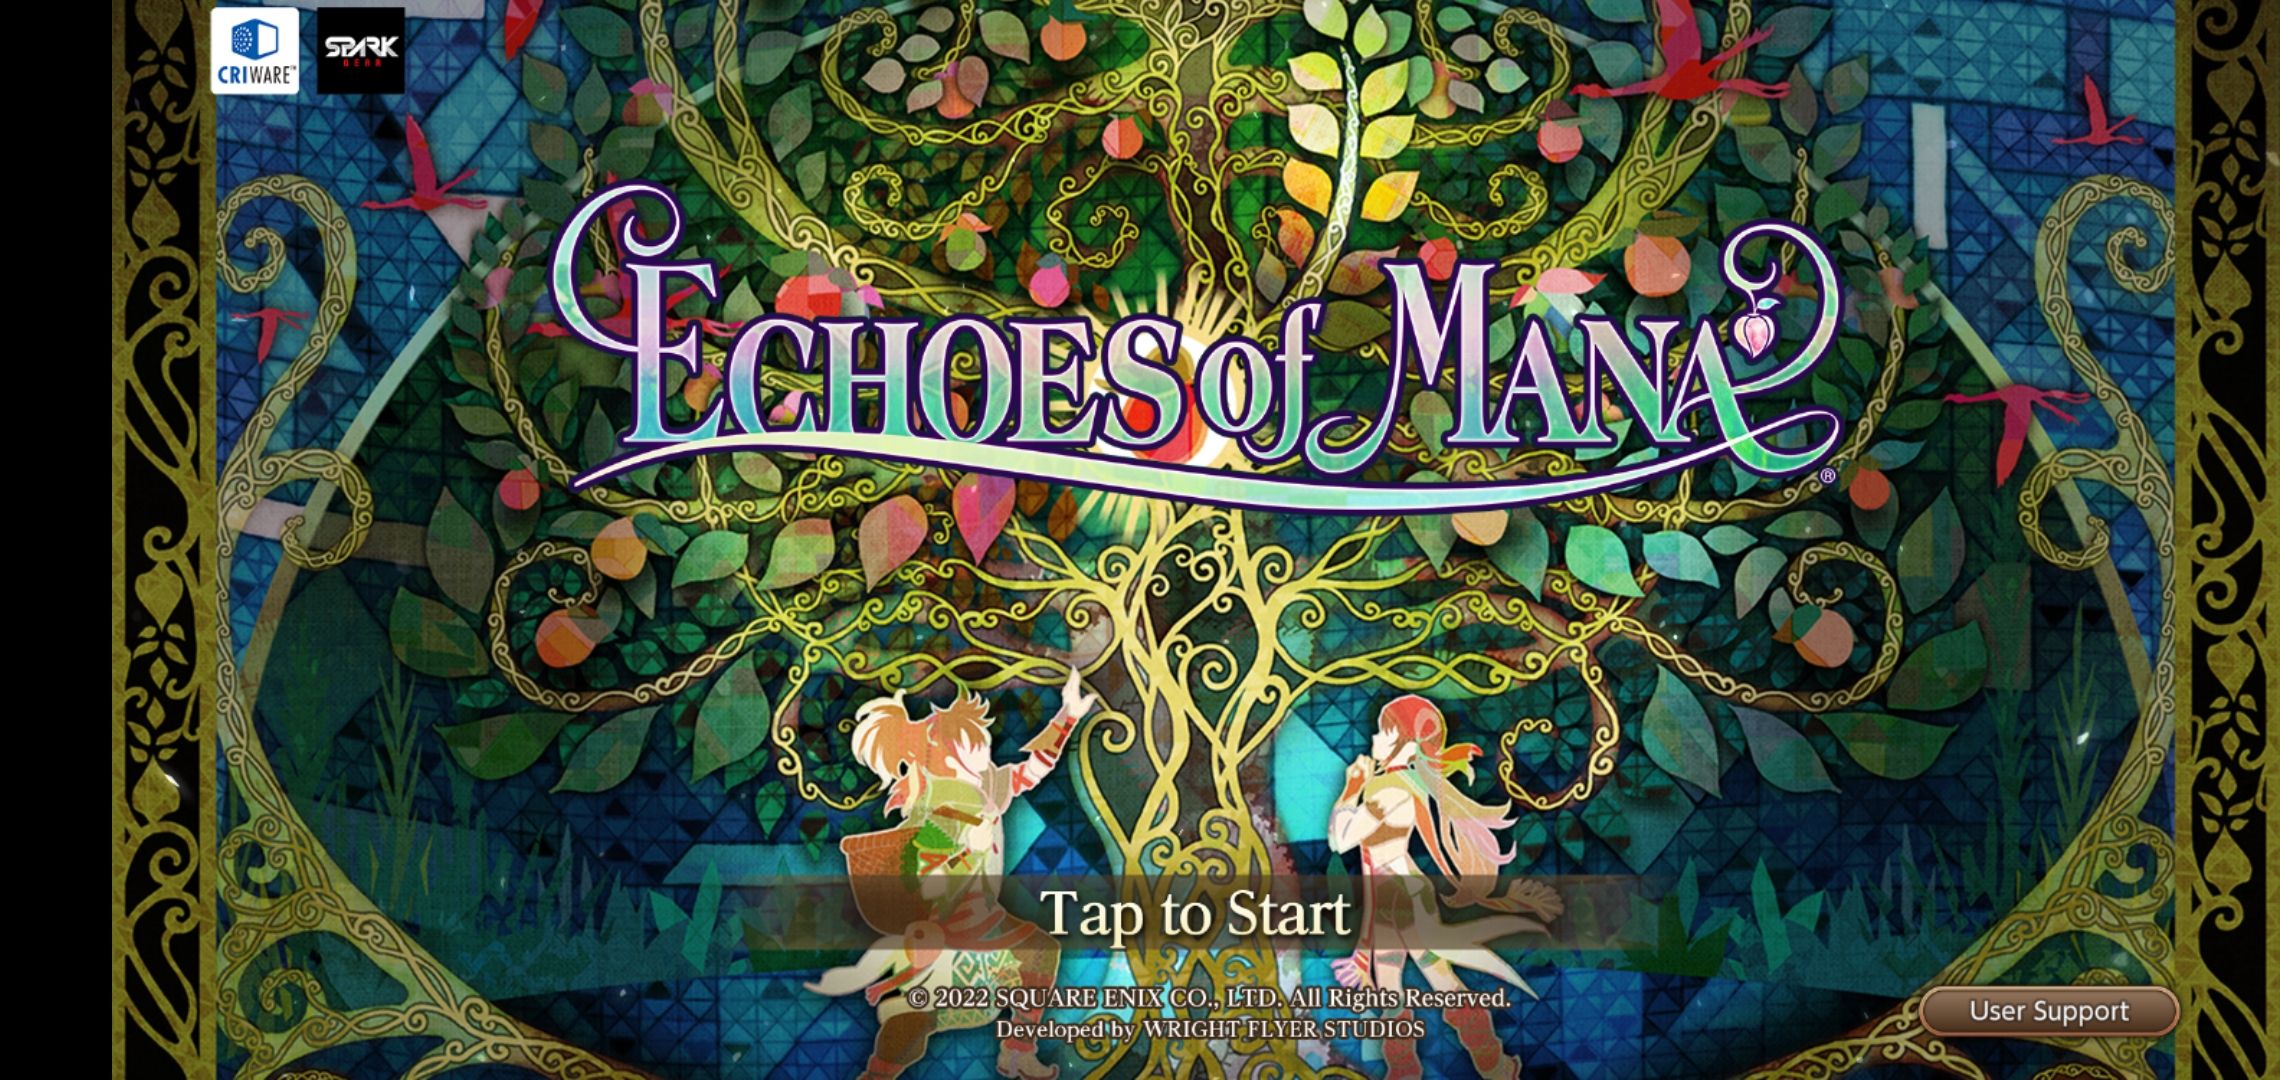 Echoes_Of_Mana_Getting_started_1